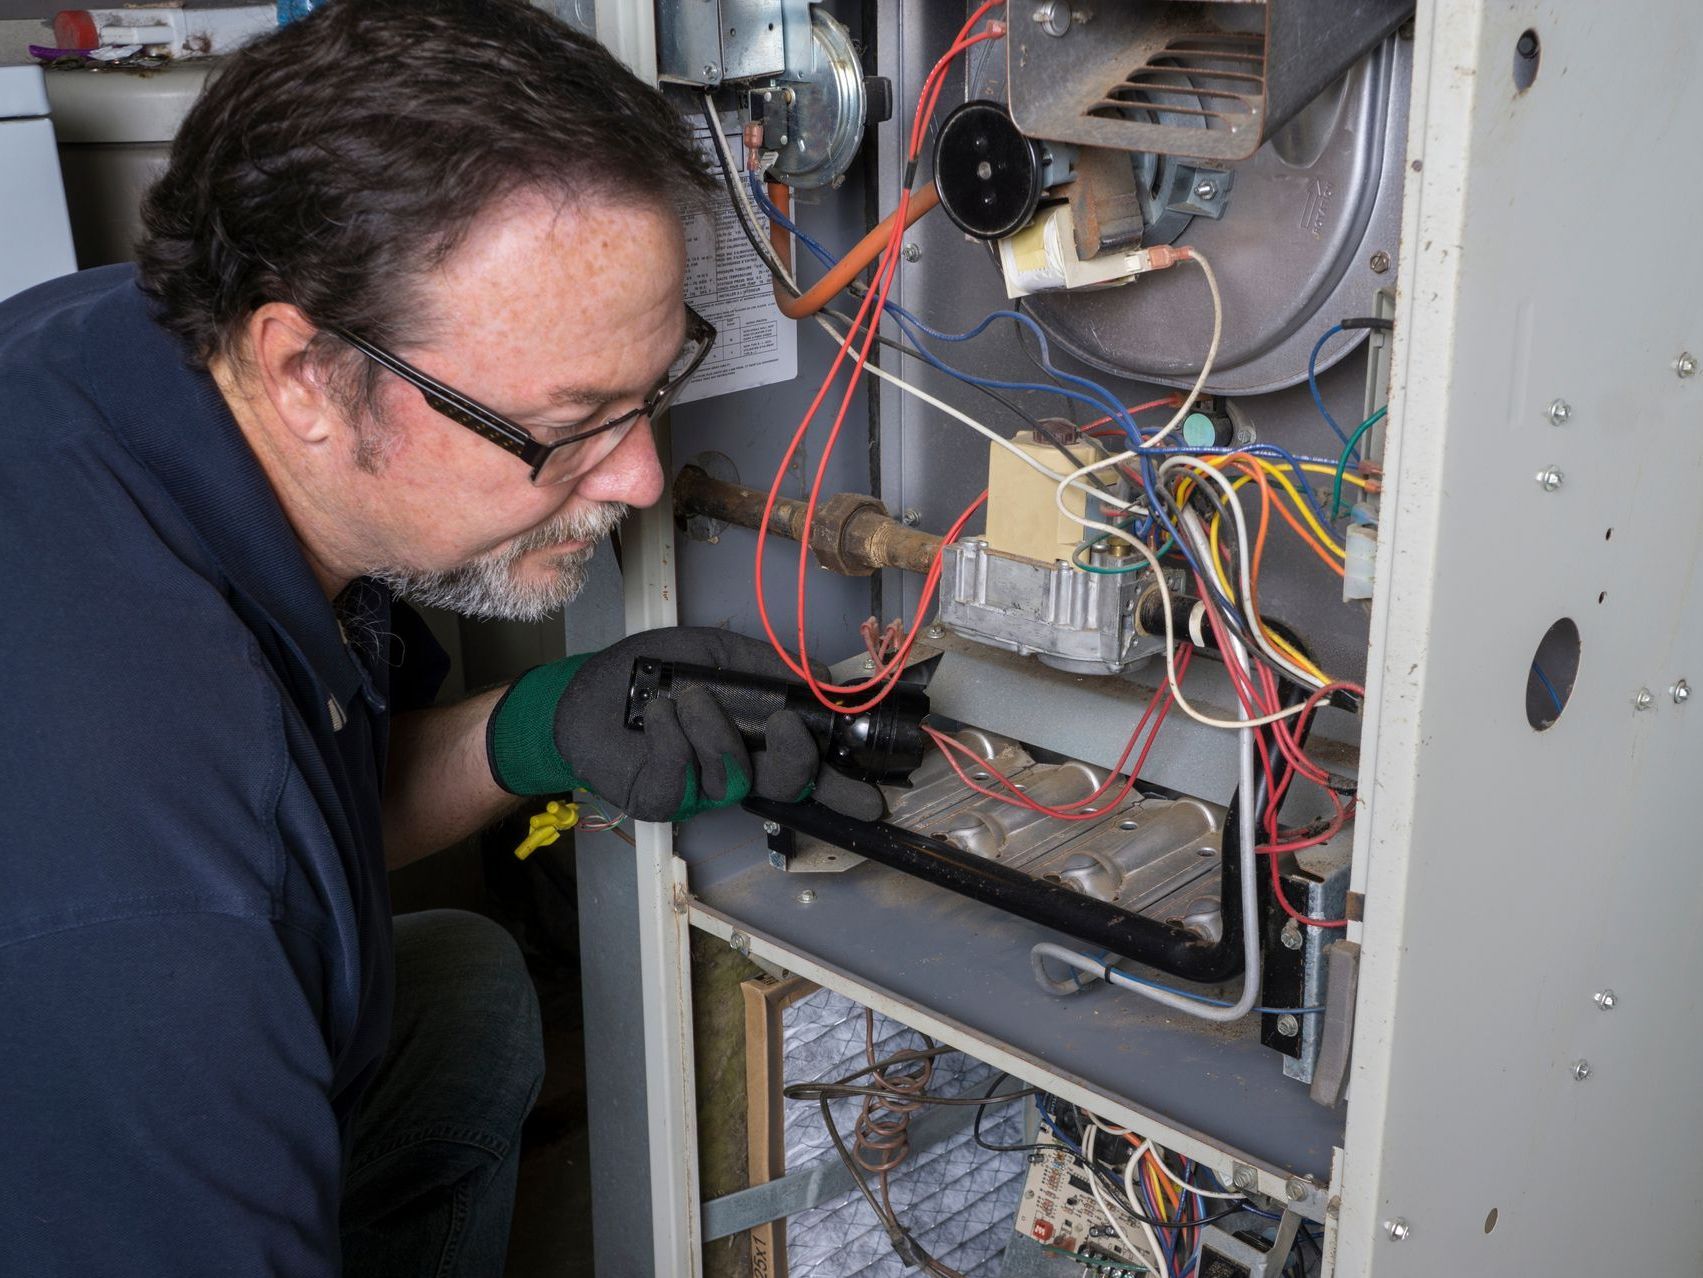 An experienced technician carefully inspecting a gas furnace, wearing protective gear and using specialized tools to ensure proper functioning and maintenance.